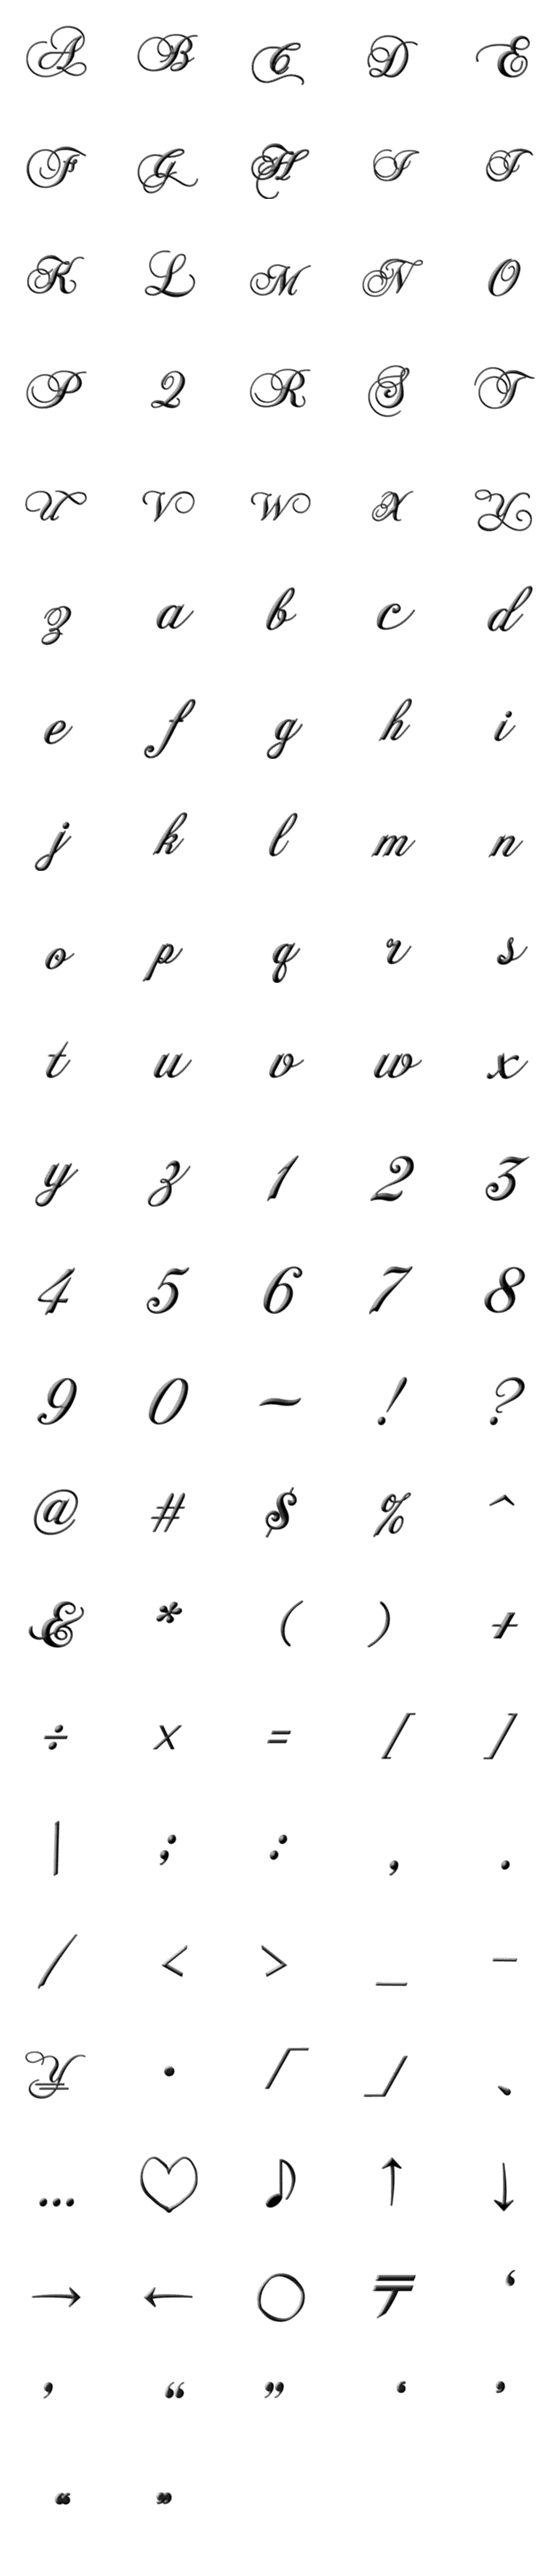 [LINE絵文字]カリグラフィー風のデコ文字 3の画像一覧